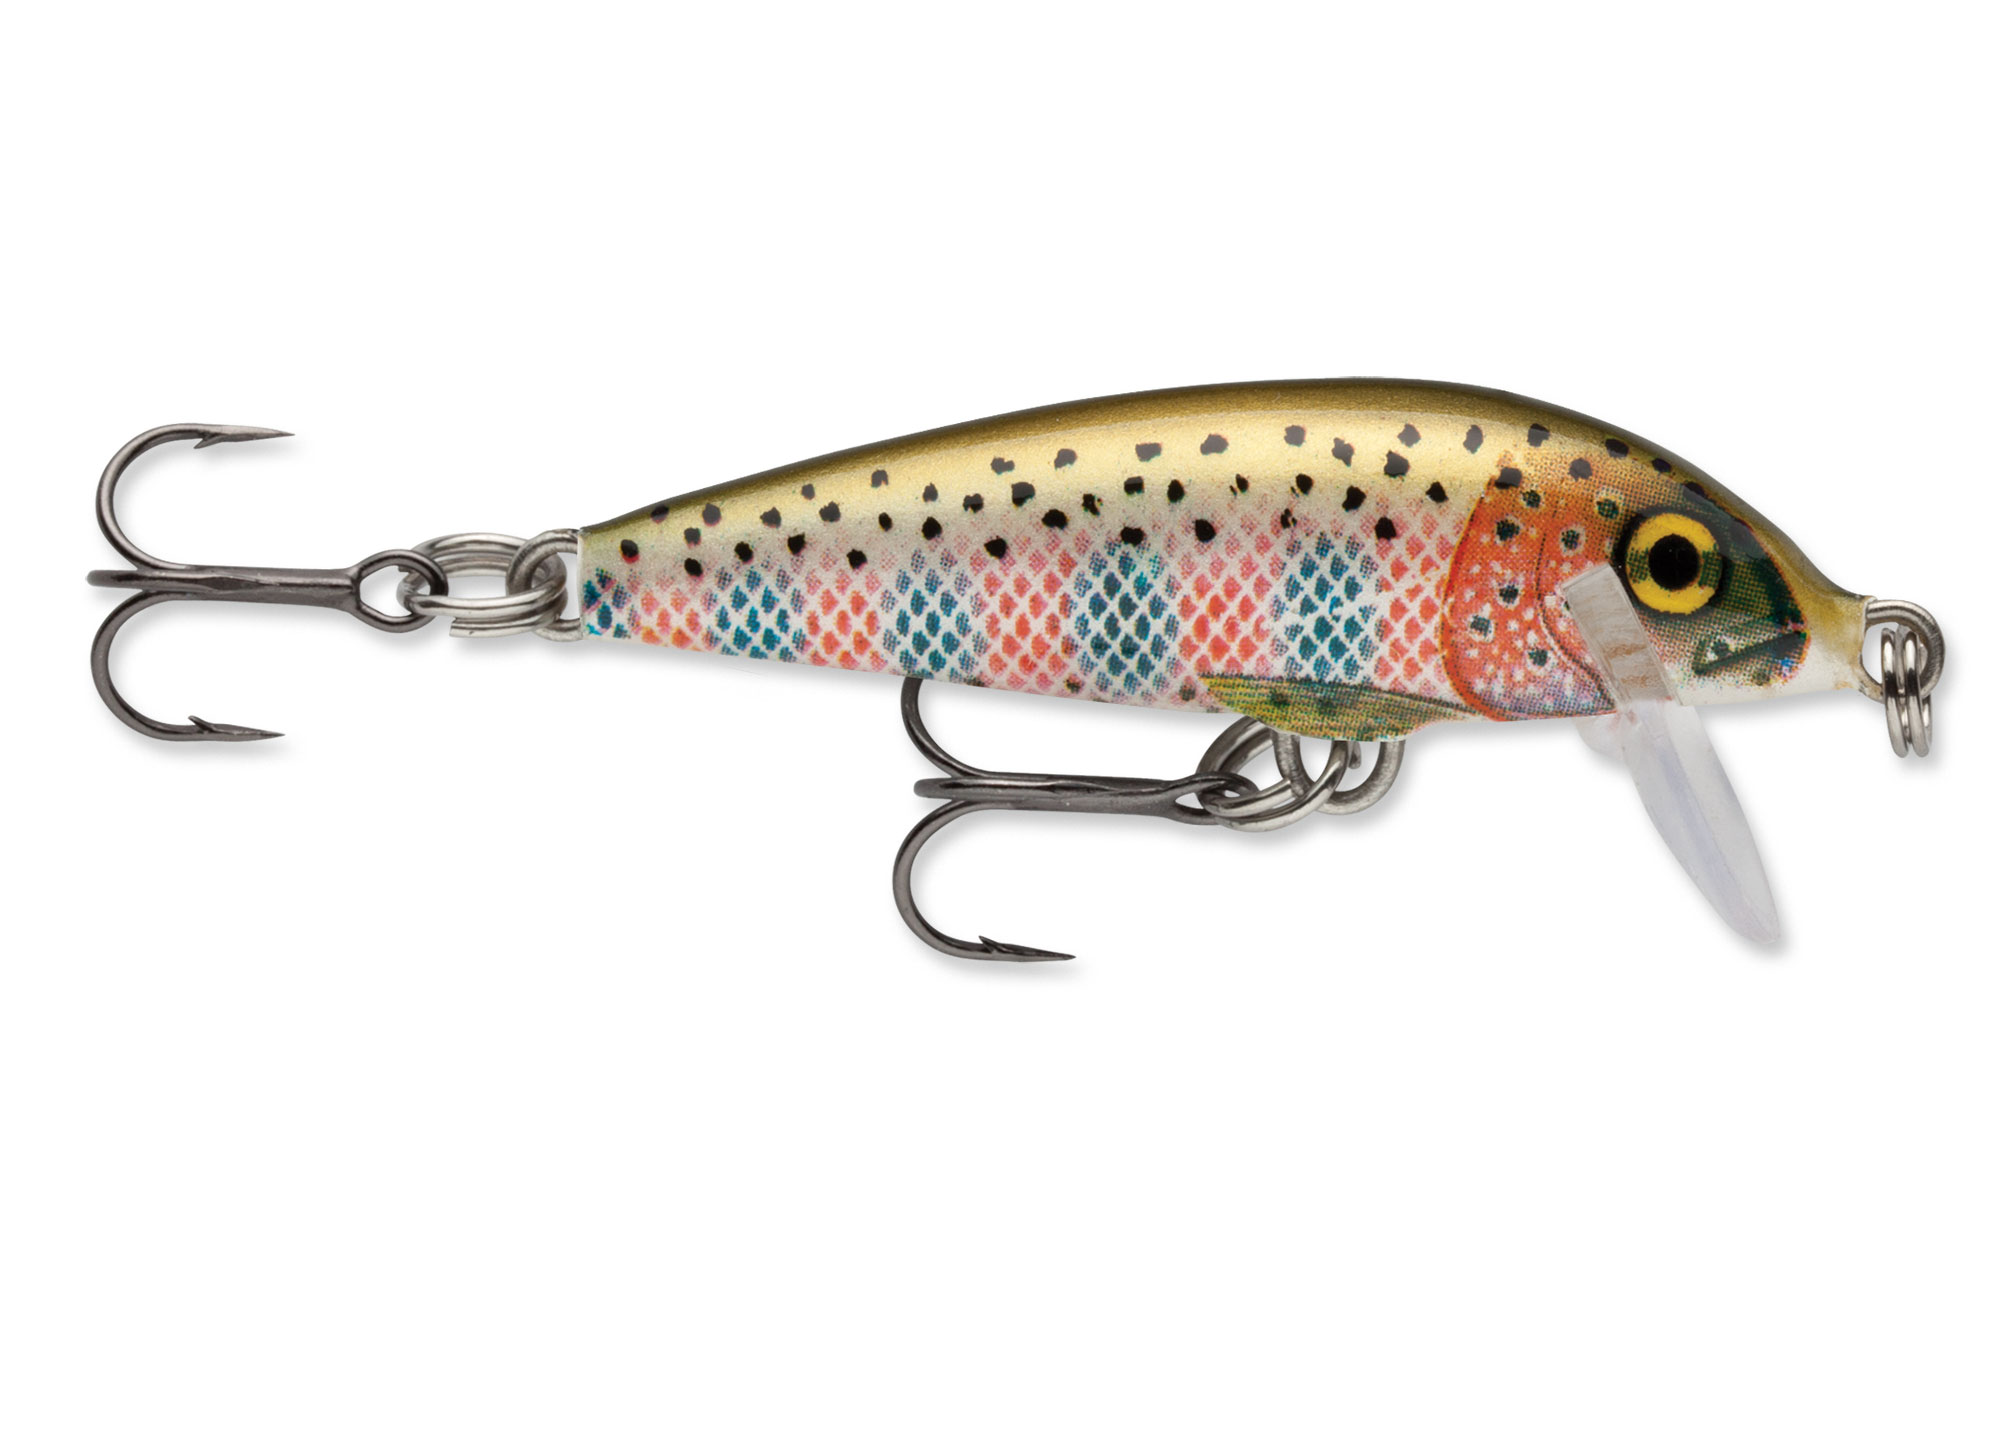 Rapala Countdown Sinking Lure Size: 11cm 16g : RT - Rainbow Trout